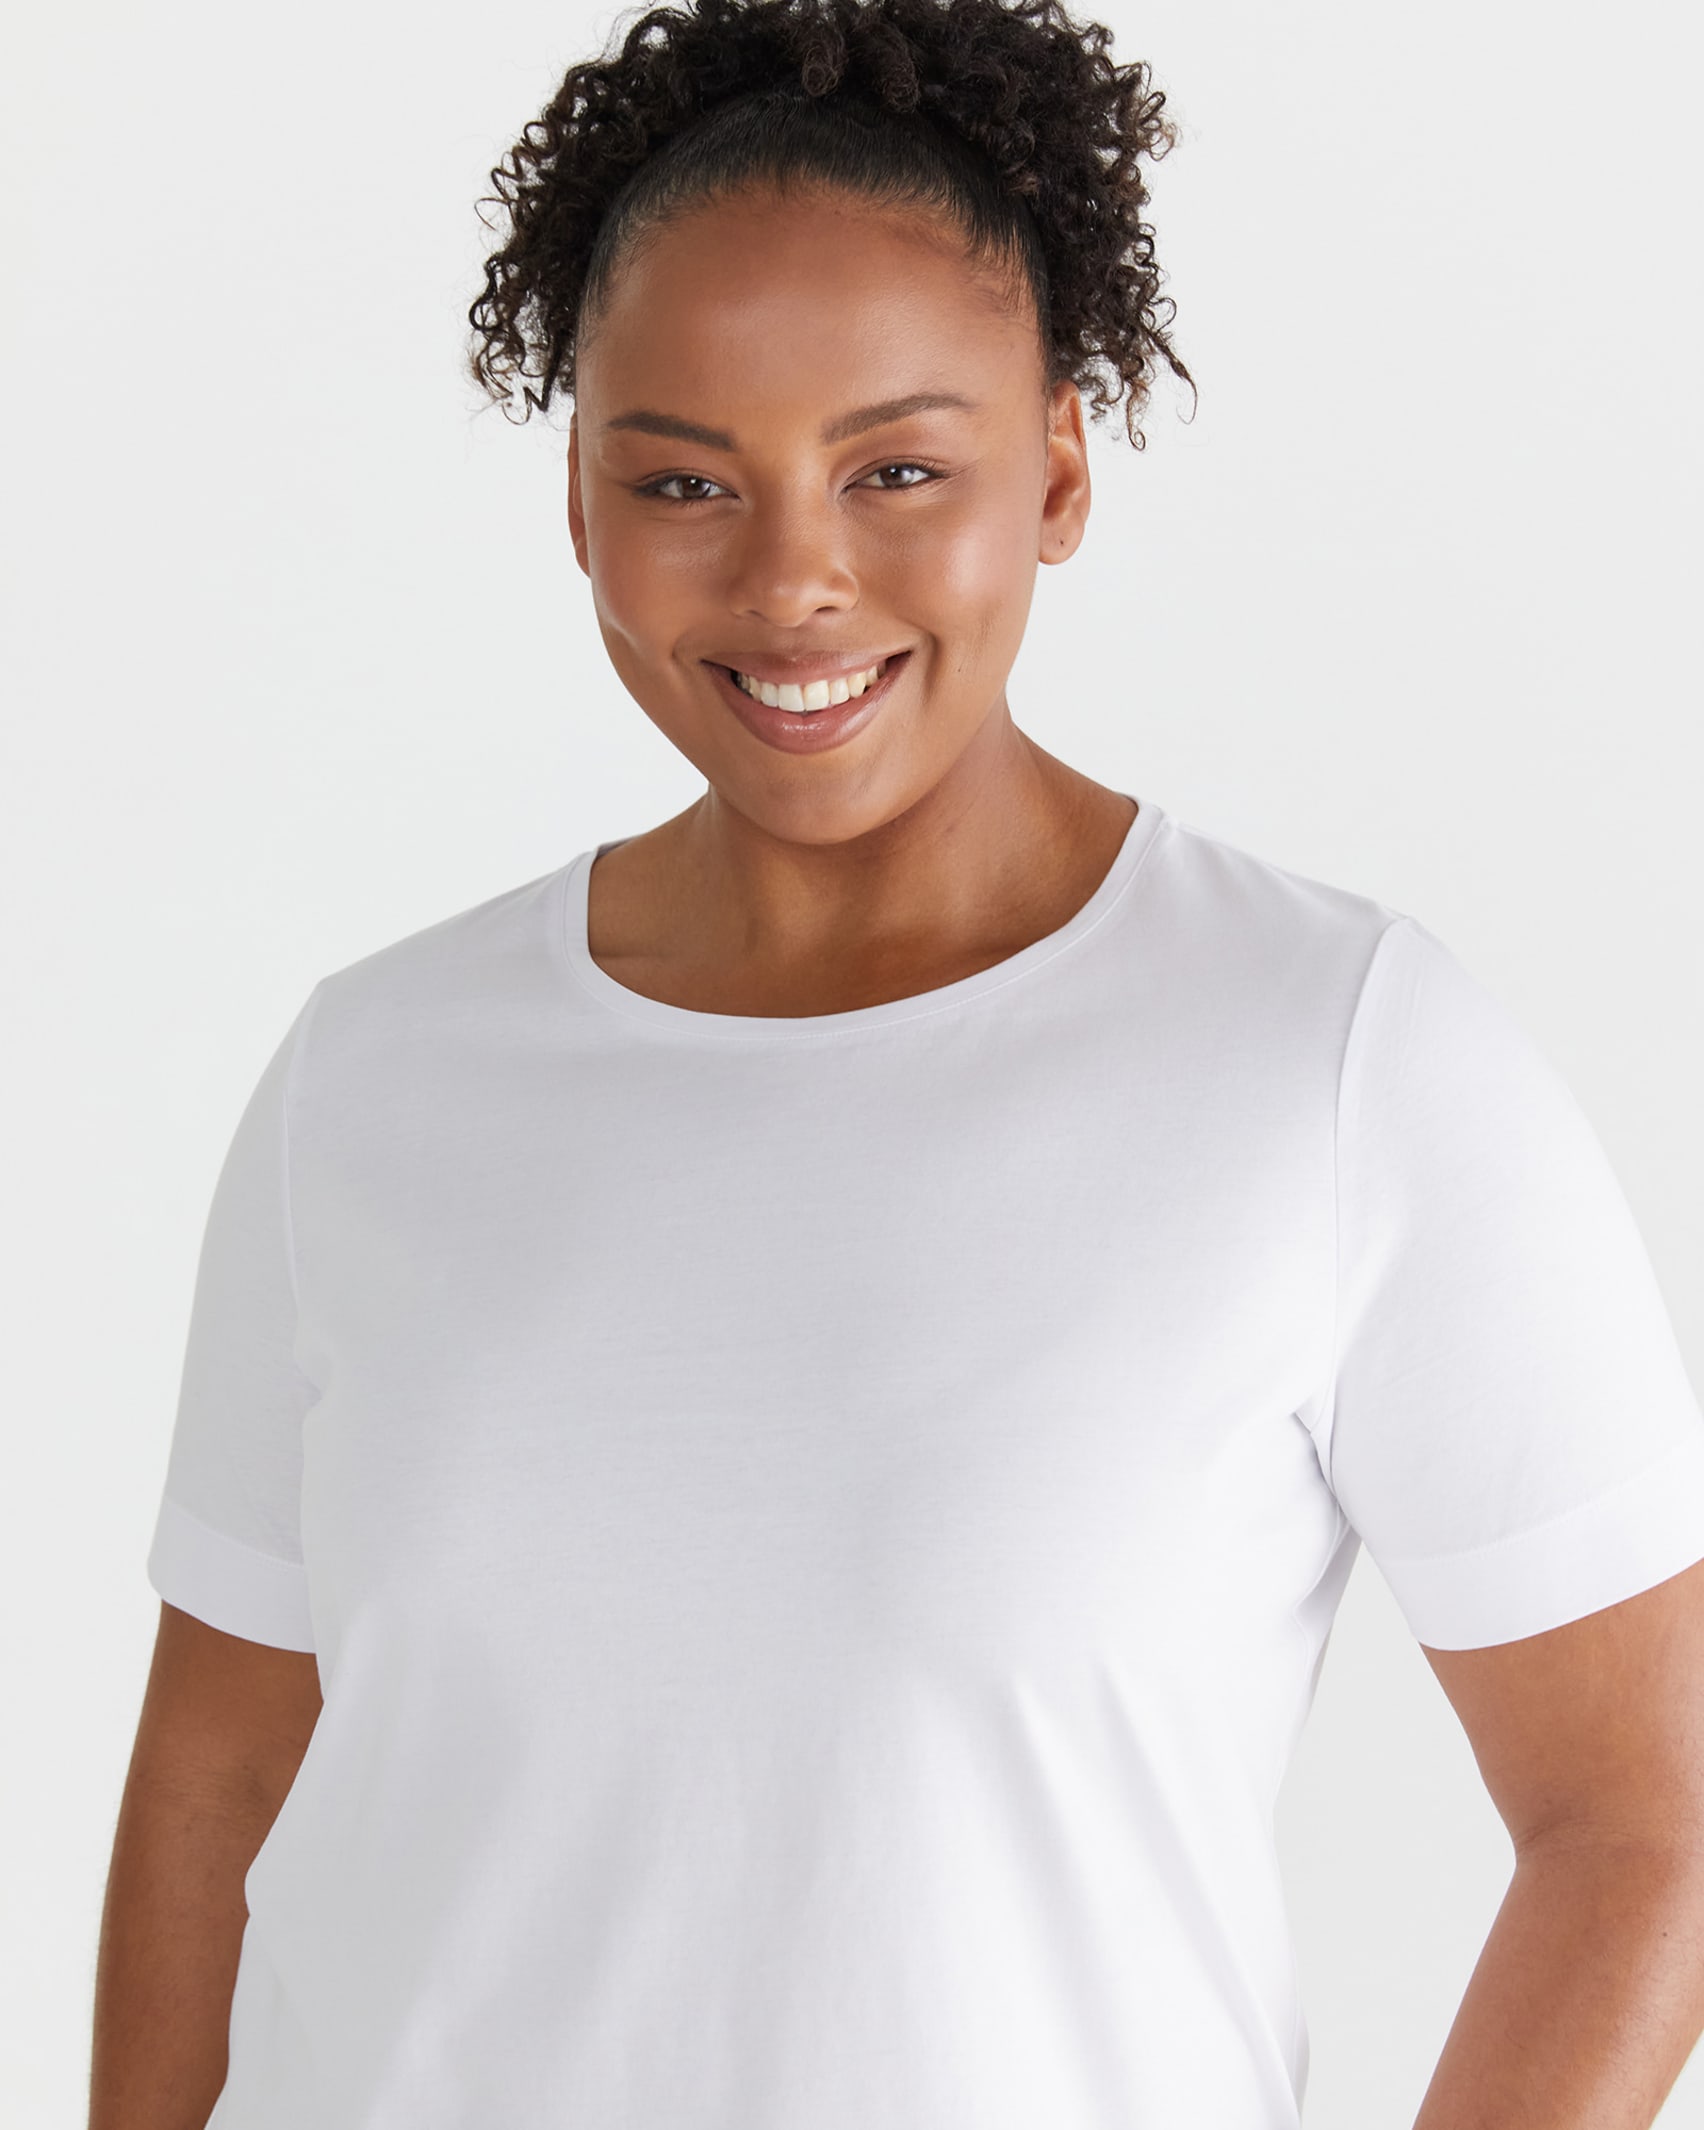 Cotton Short Sleeve Tee in WHITE